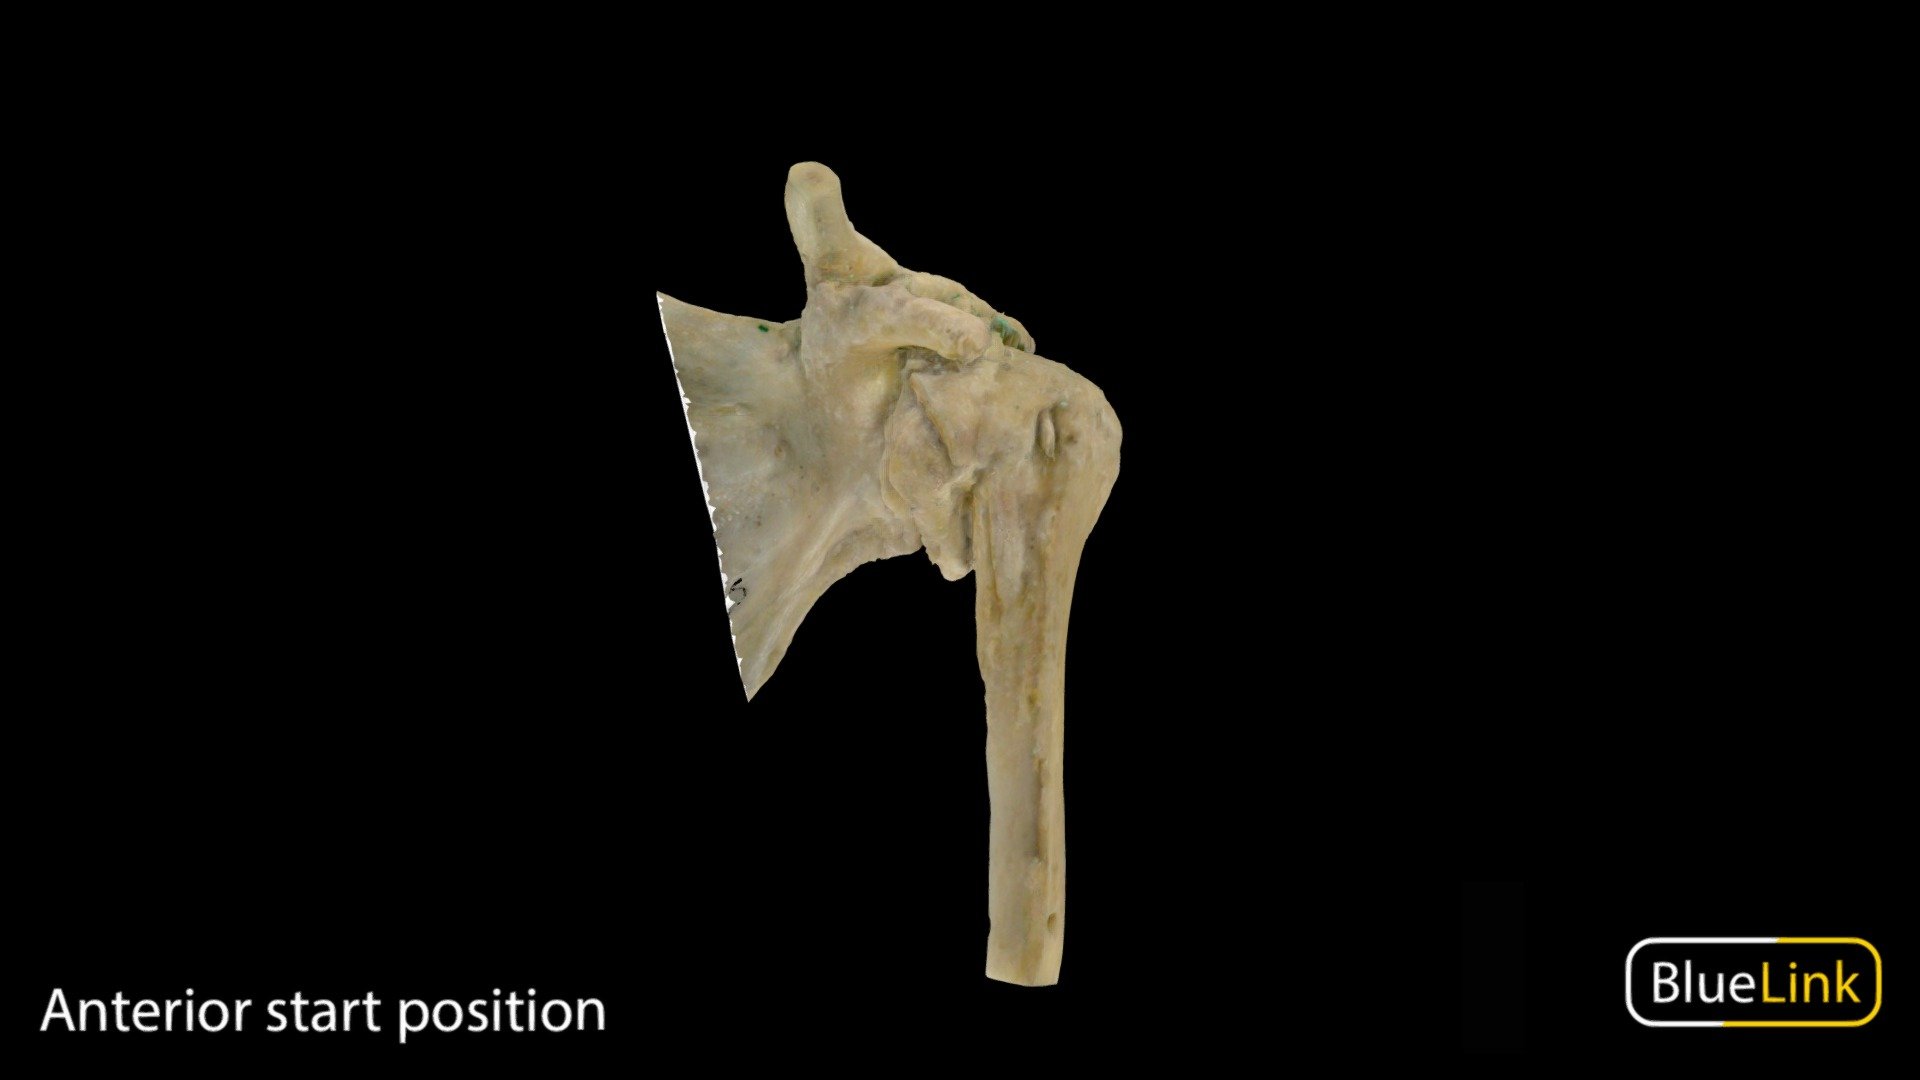 3D scan of the glenohumeral joint

Captured with Einscan Pro

Captured and edited by: Will Gribbin

Copyright2019 BK Alsup &amp; GM Fox

ID 26884-U03 - Glenohumeral Joint - 3D model by Bluelink Anatomy - University of Michigan (@bluelinkanatomy) 3d model